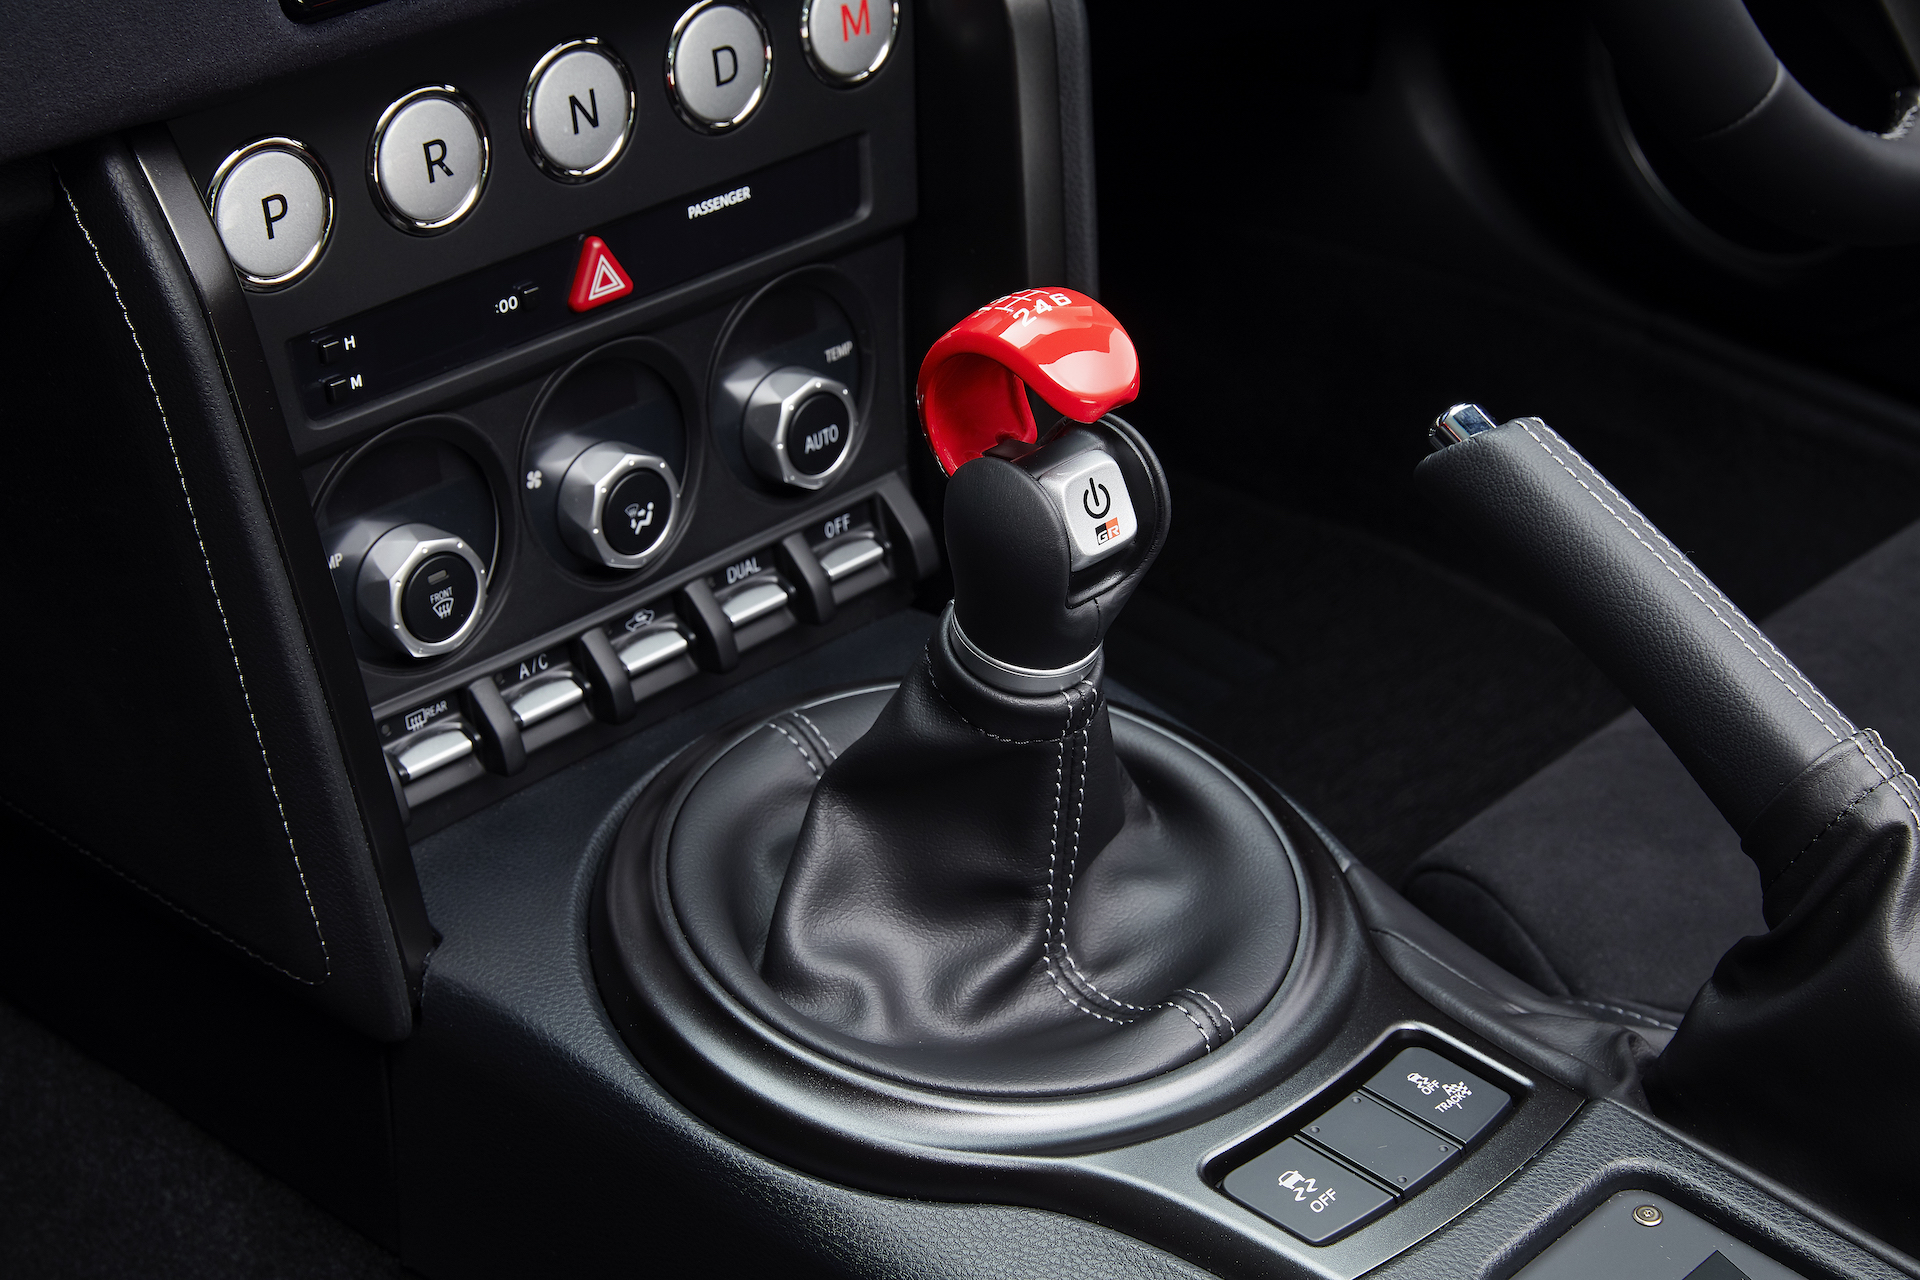 A manual-transmission Supra is coming, but not from Toyota